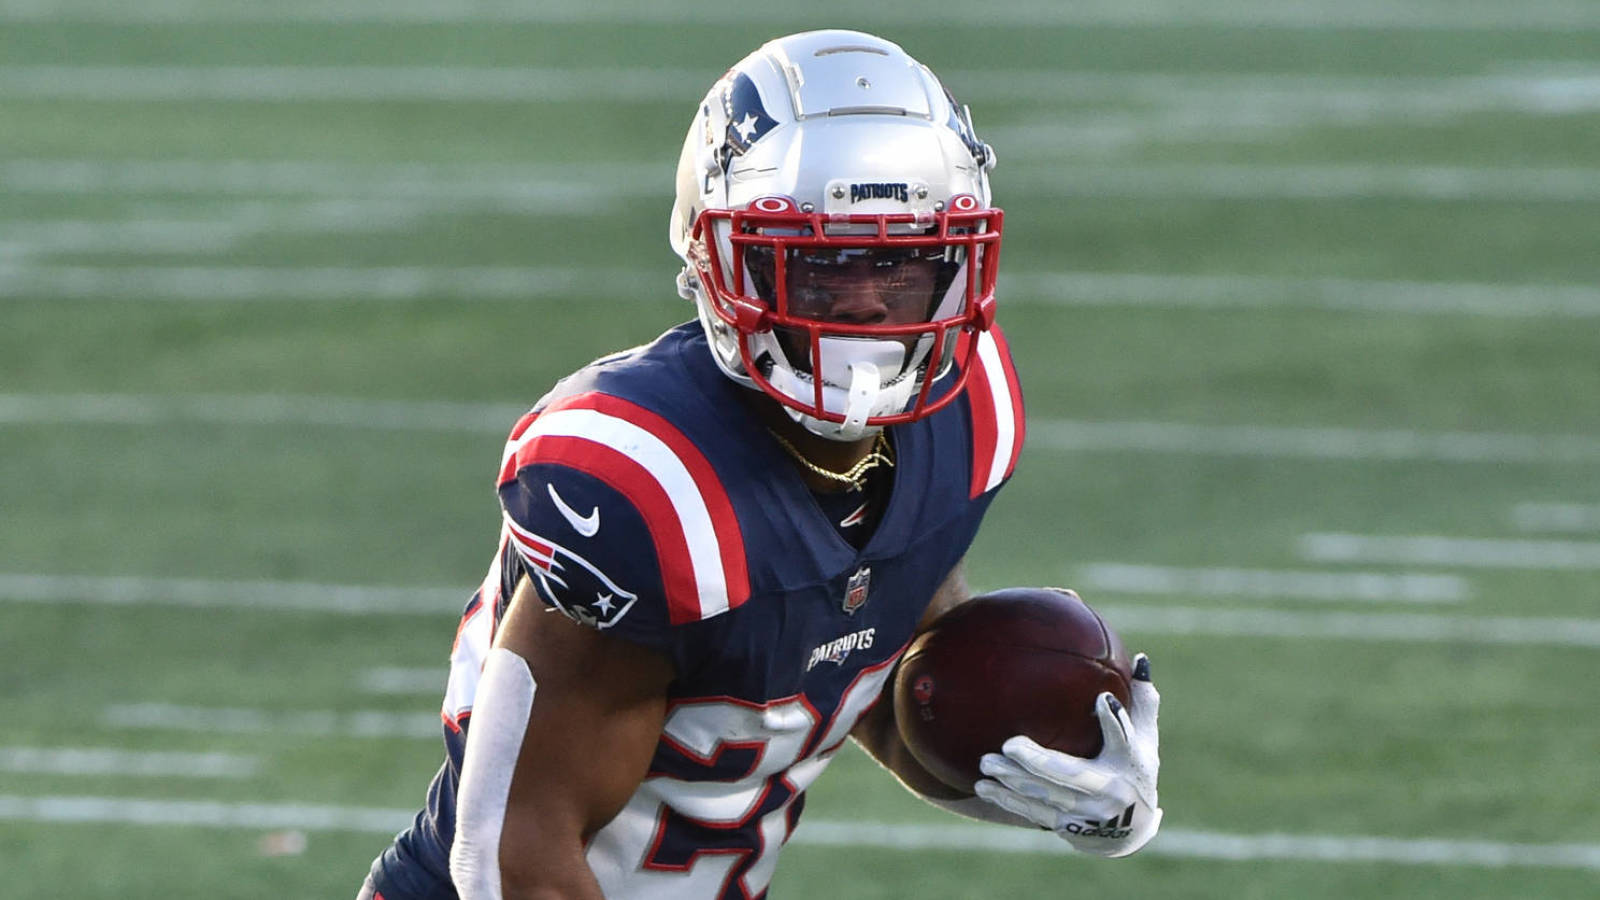 Report: Three-time Super Bowl champion James White expected to re-sign with Patriots